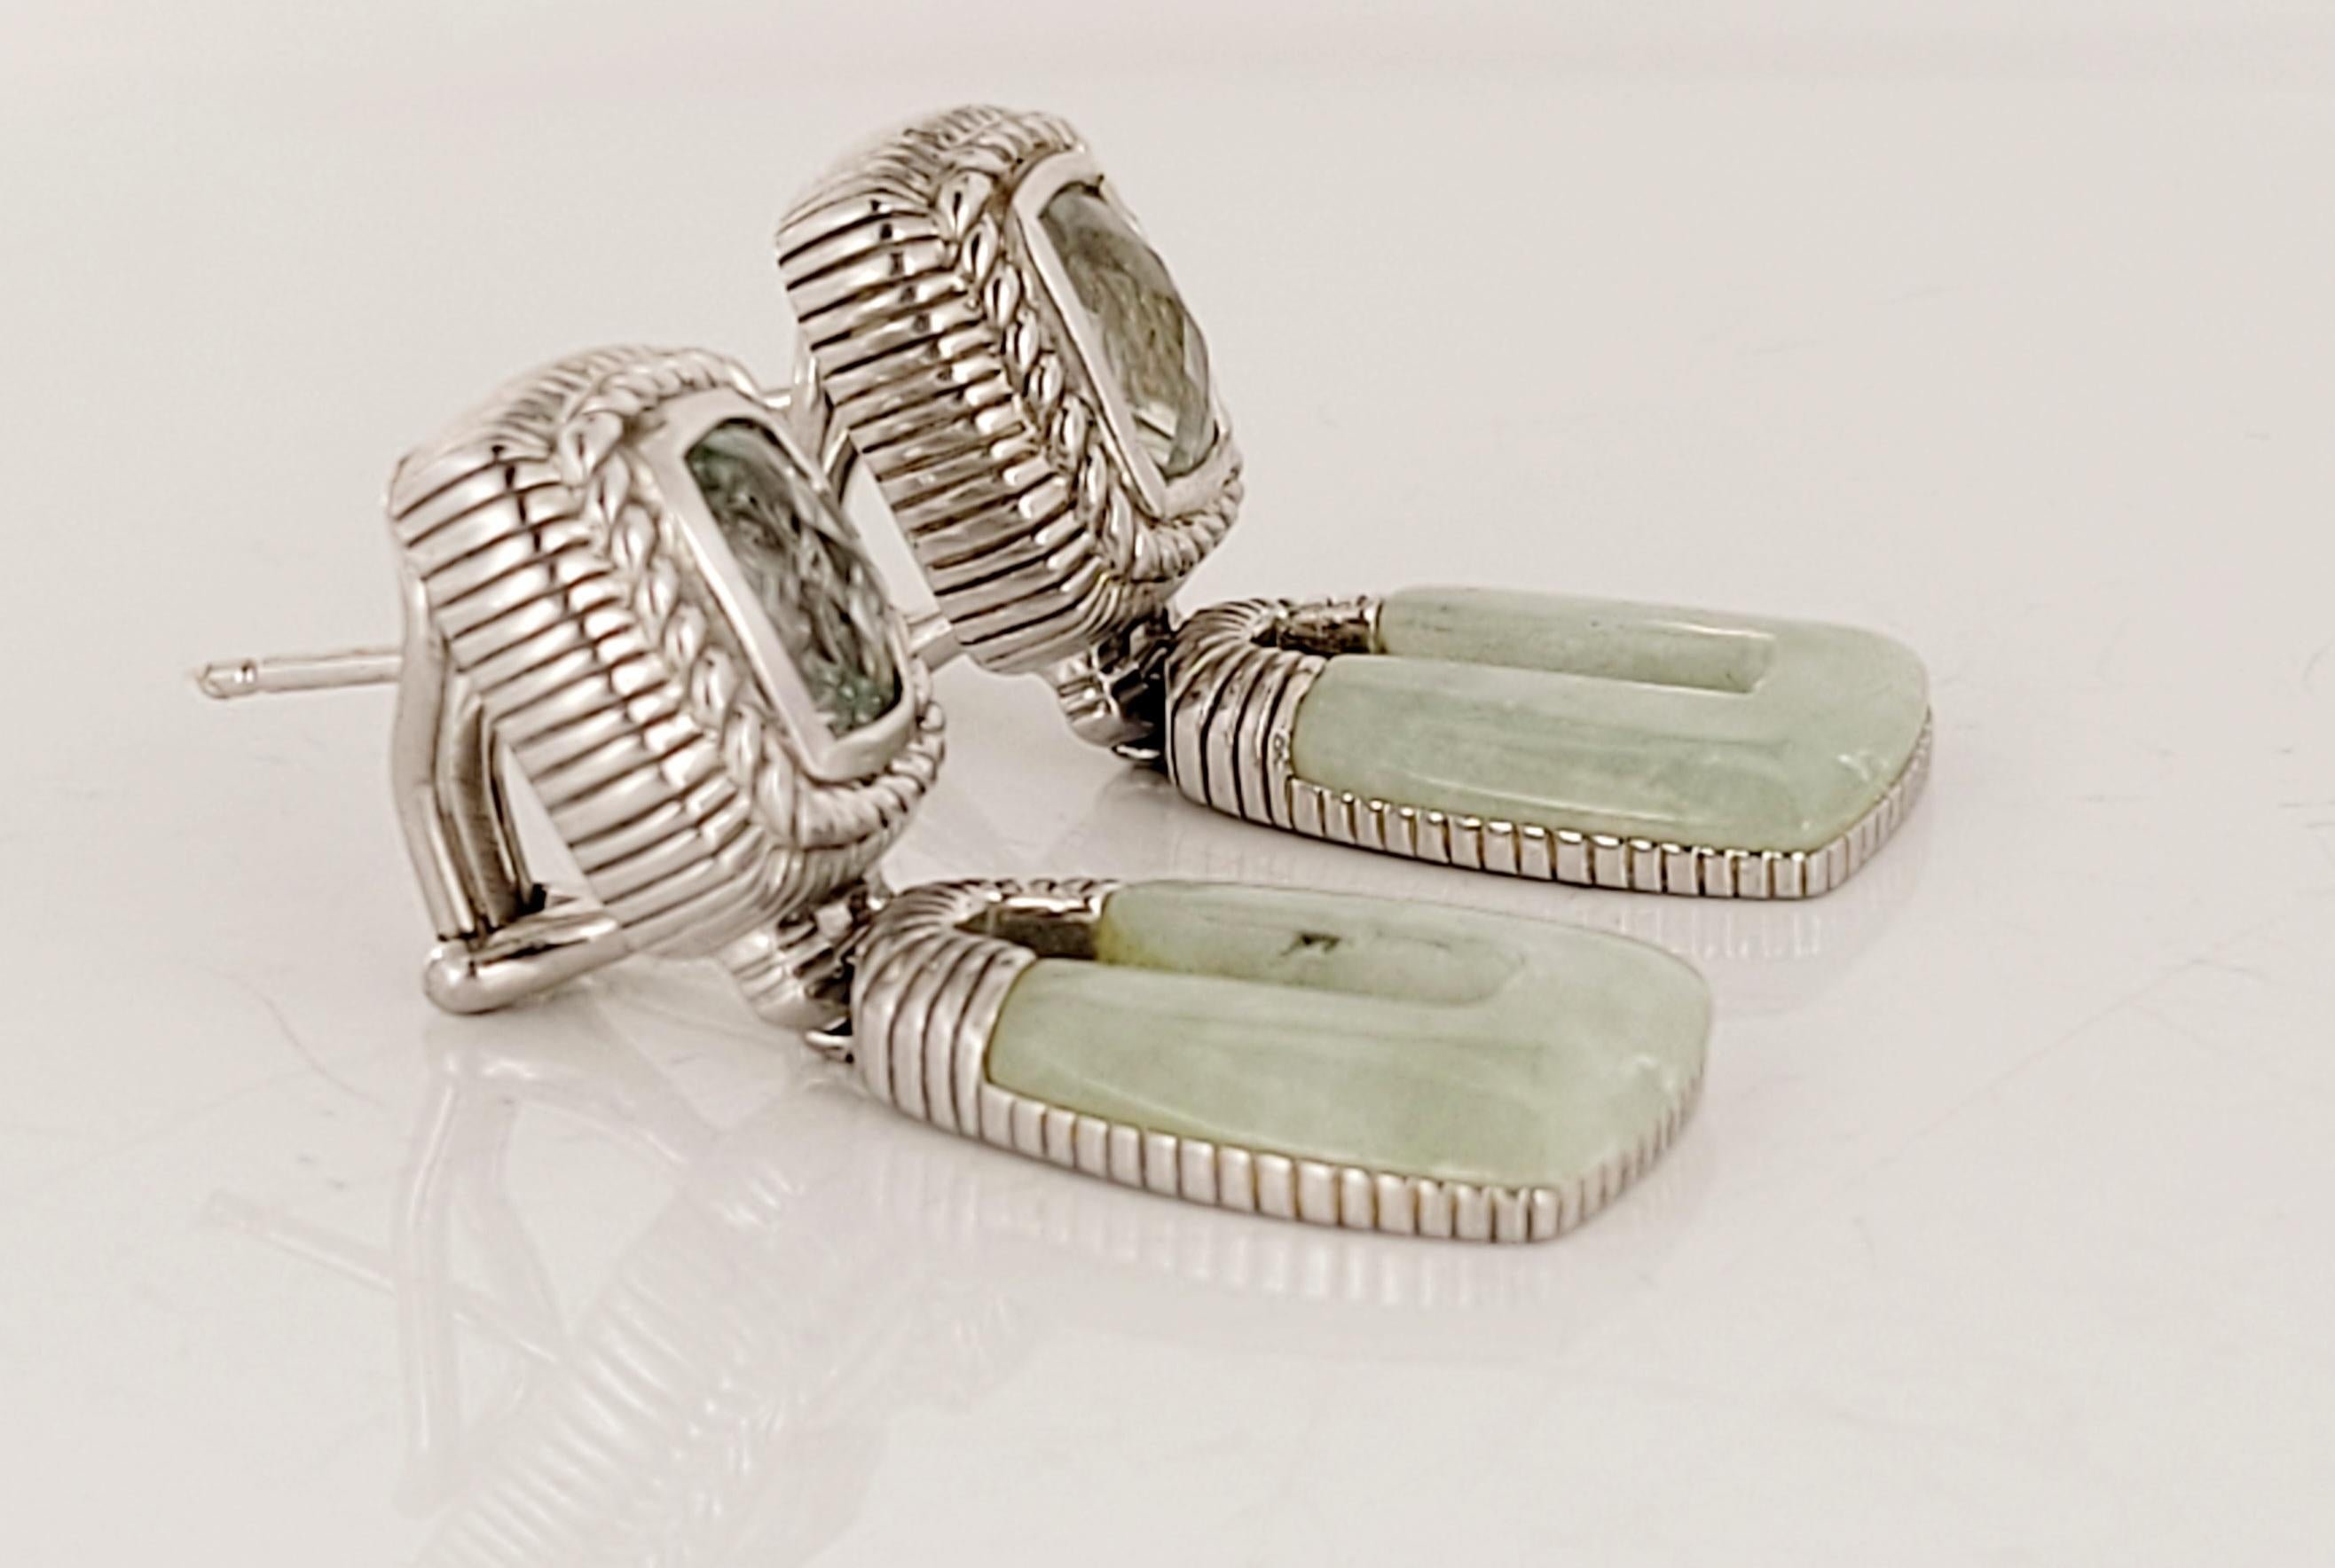 Brand Judith Ripka
Prasiolite and Jade Earrings
Material Sterling Silver 
Metal Purity 925
Main Stone Jade and green Amethyst 
Main Stone Color Green
Style Dangle/Drop
Earrings Dimension 35.6 X 12.4mm
Earring Weight: 17.1 Total